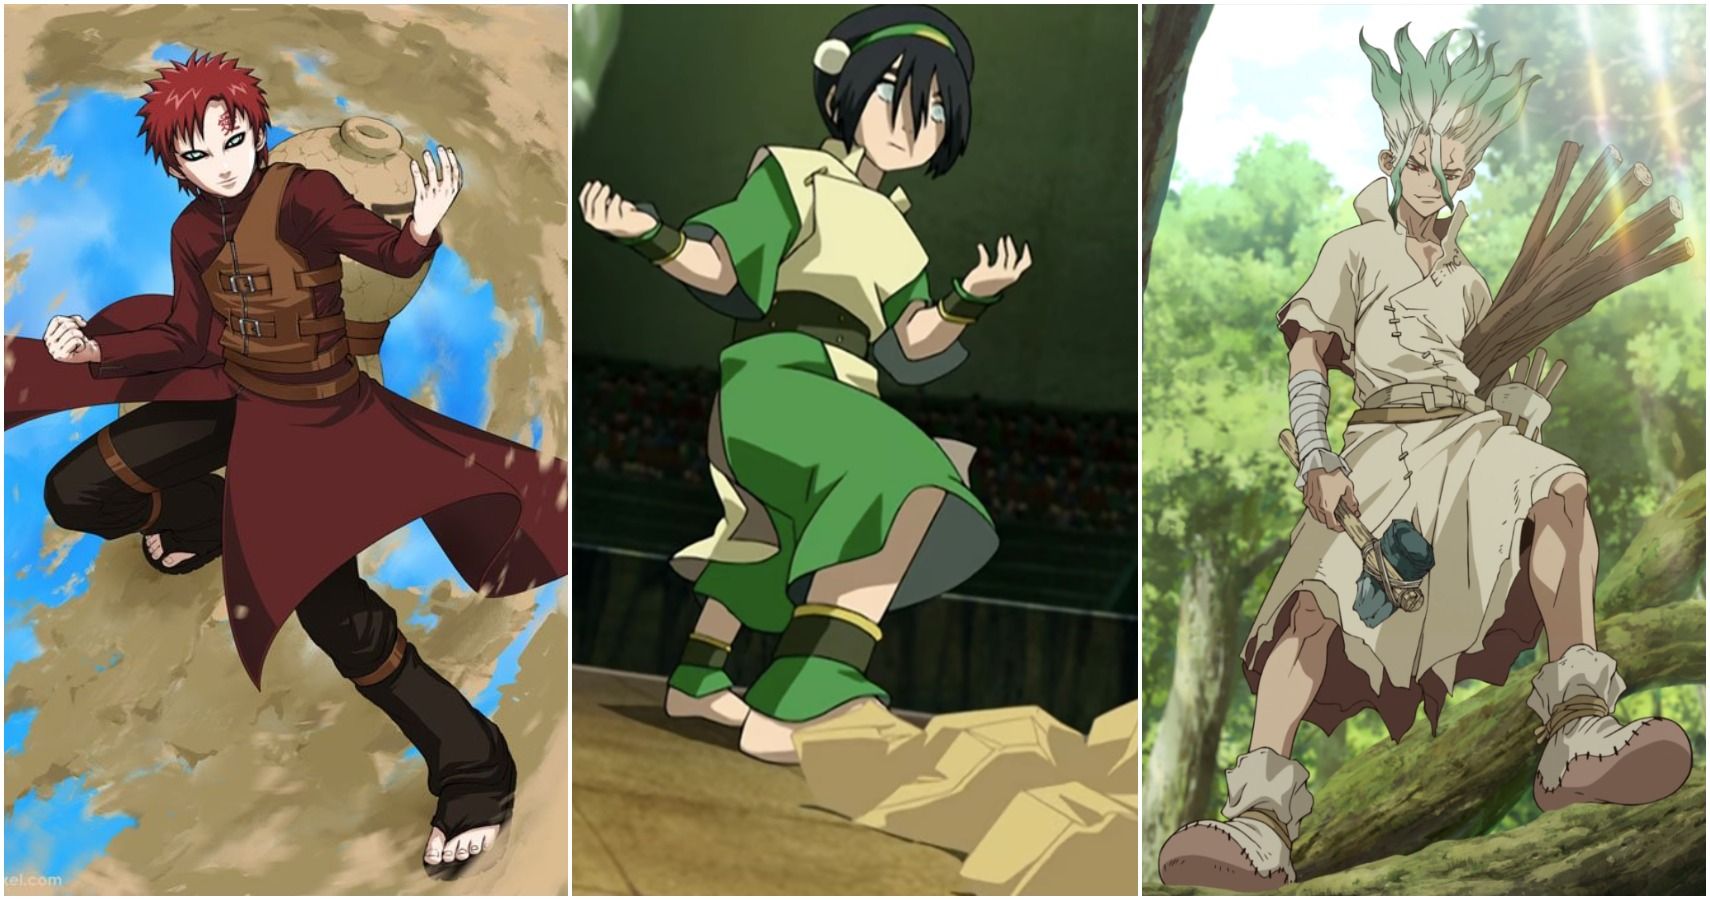 Avatar: The Last Airbender ー 10 Anime Characters Who Would Make